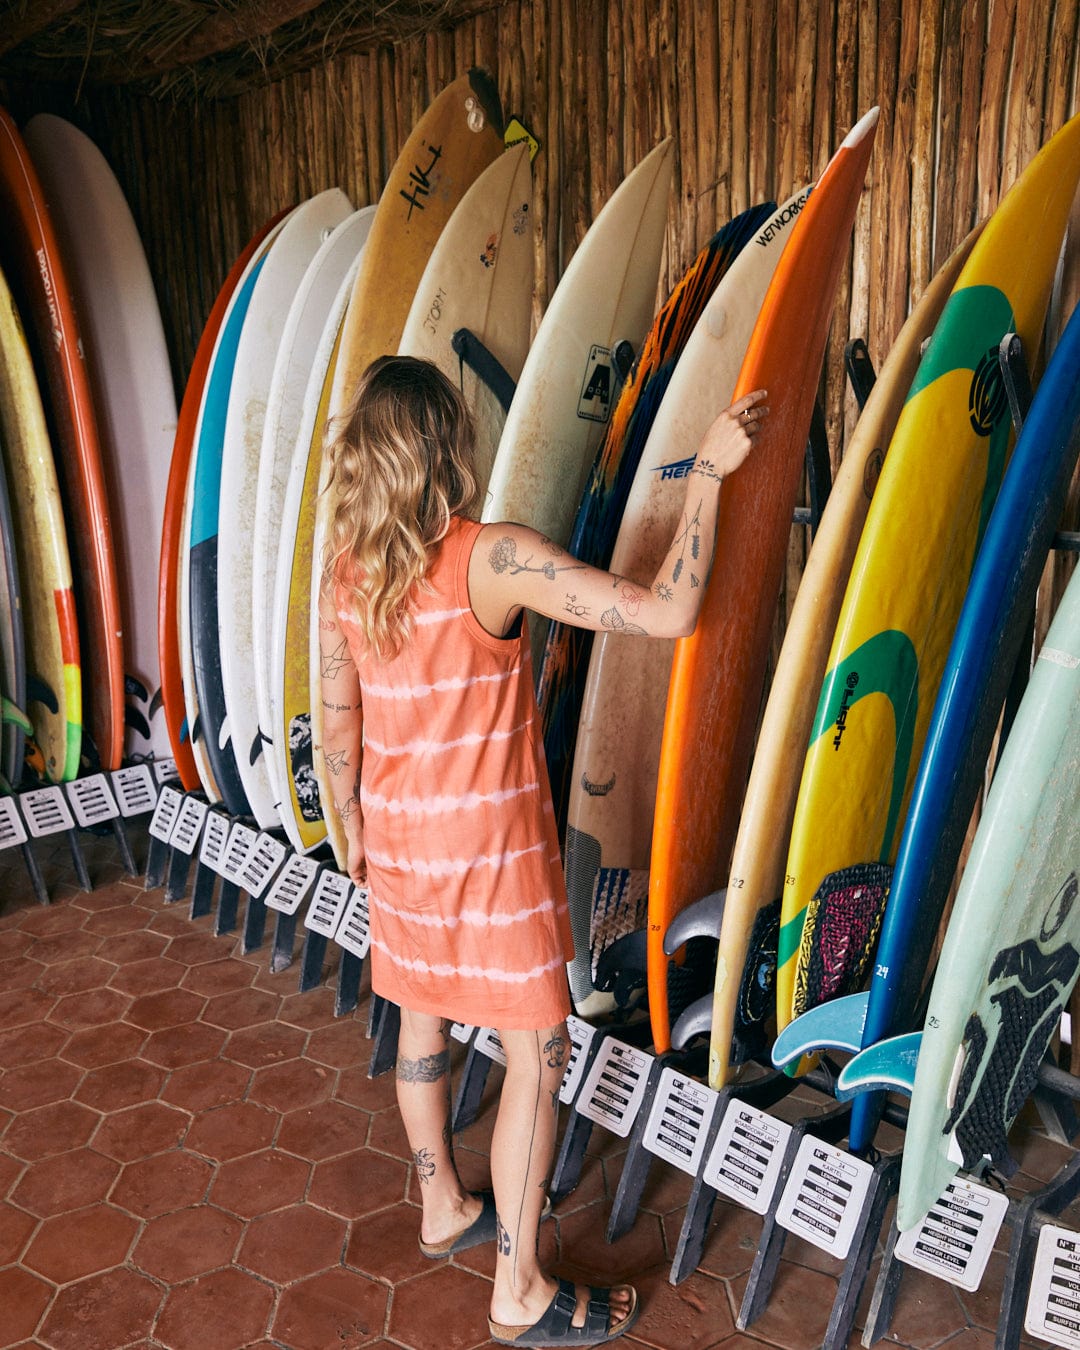 A person with tattoos and long hair in an Eliana - Womens Tie Dye Vest Dress - Peach by Saltrock stands in front of a rack of surfboards, touching one of them in a rustic, wood-paneled room.